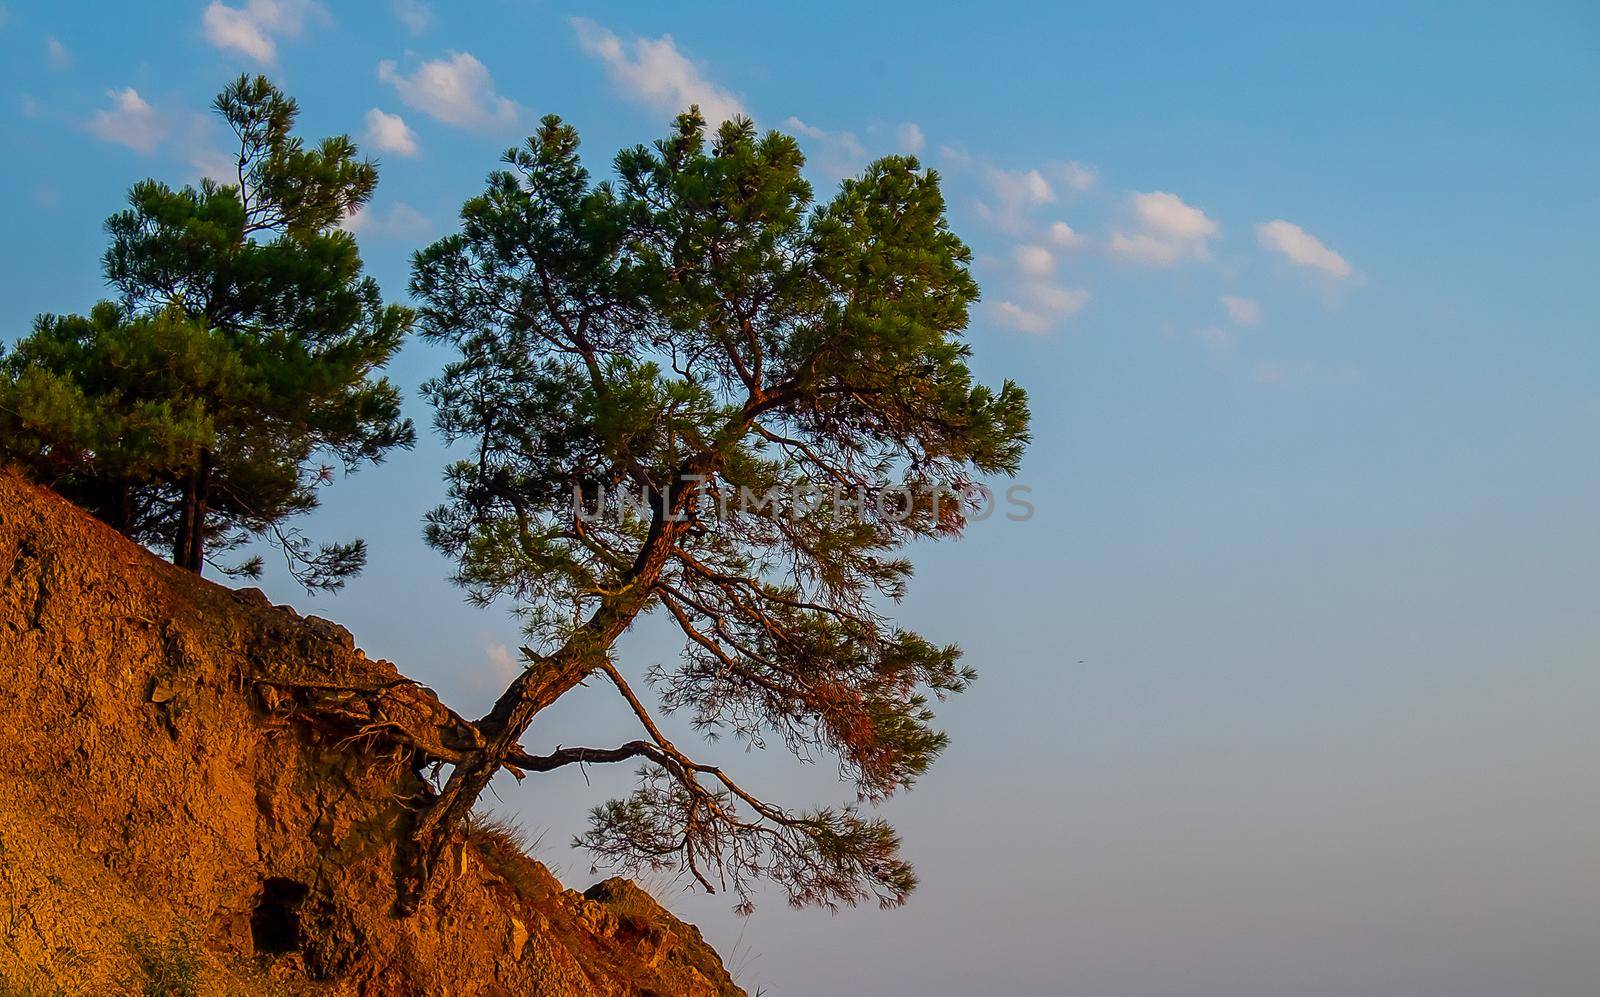 Cedar falling from a washed-out sandy slope, on the seashore at sunset